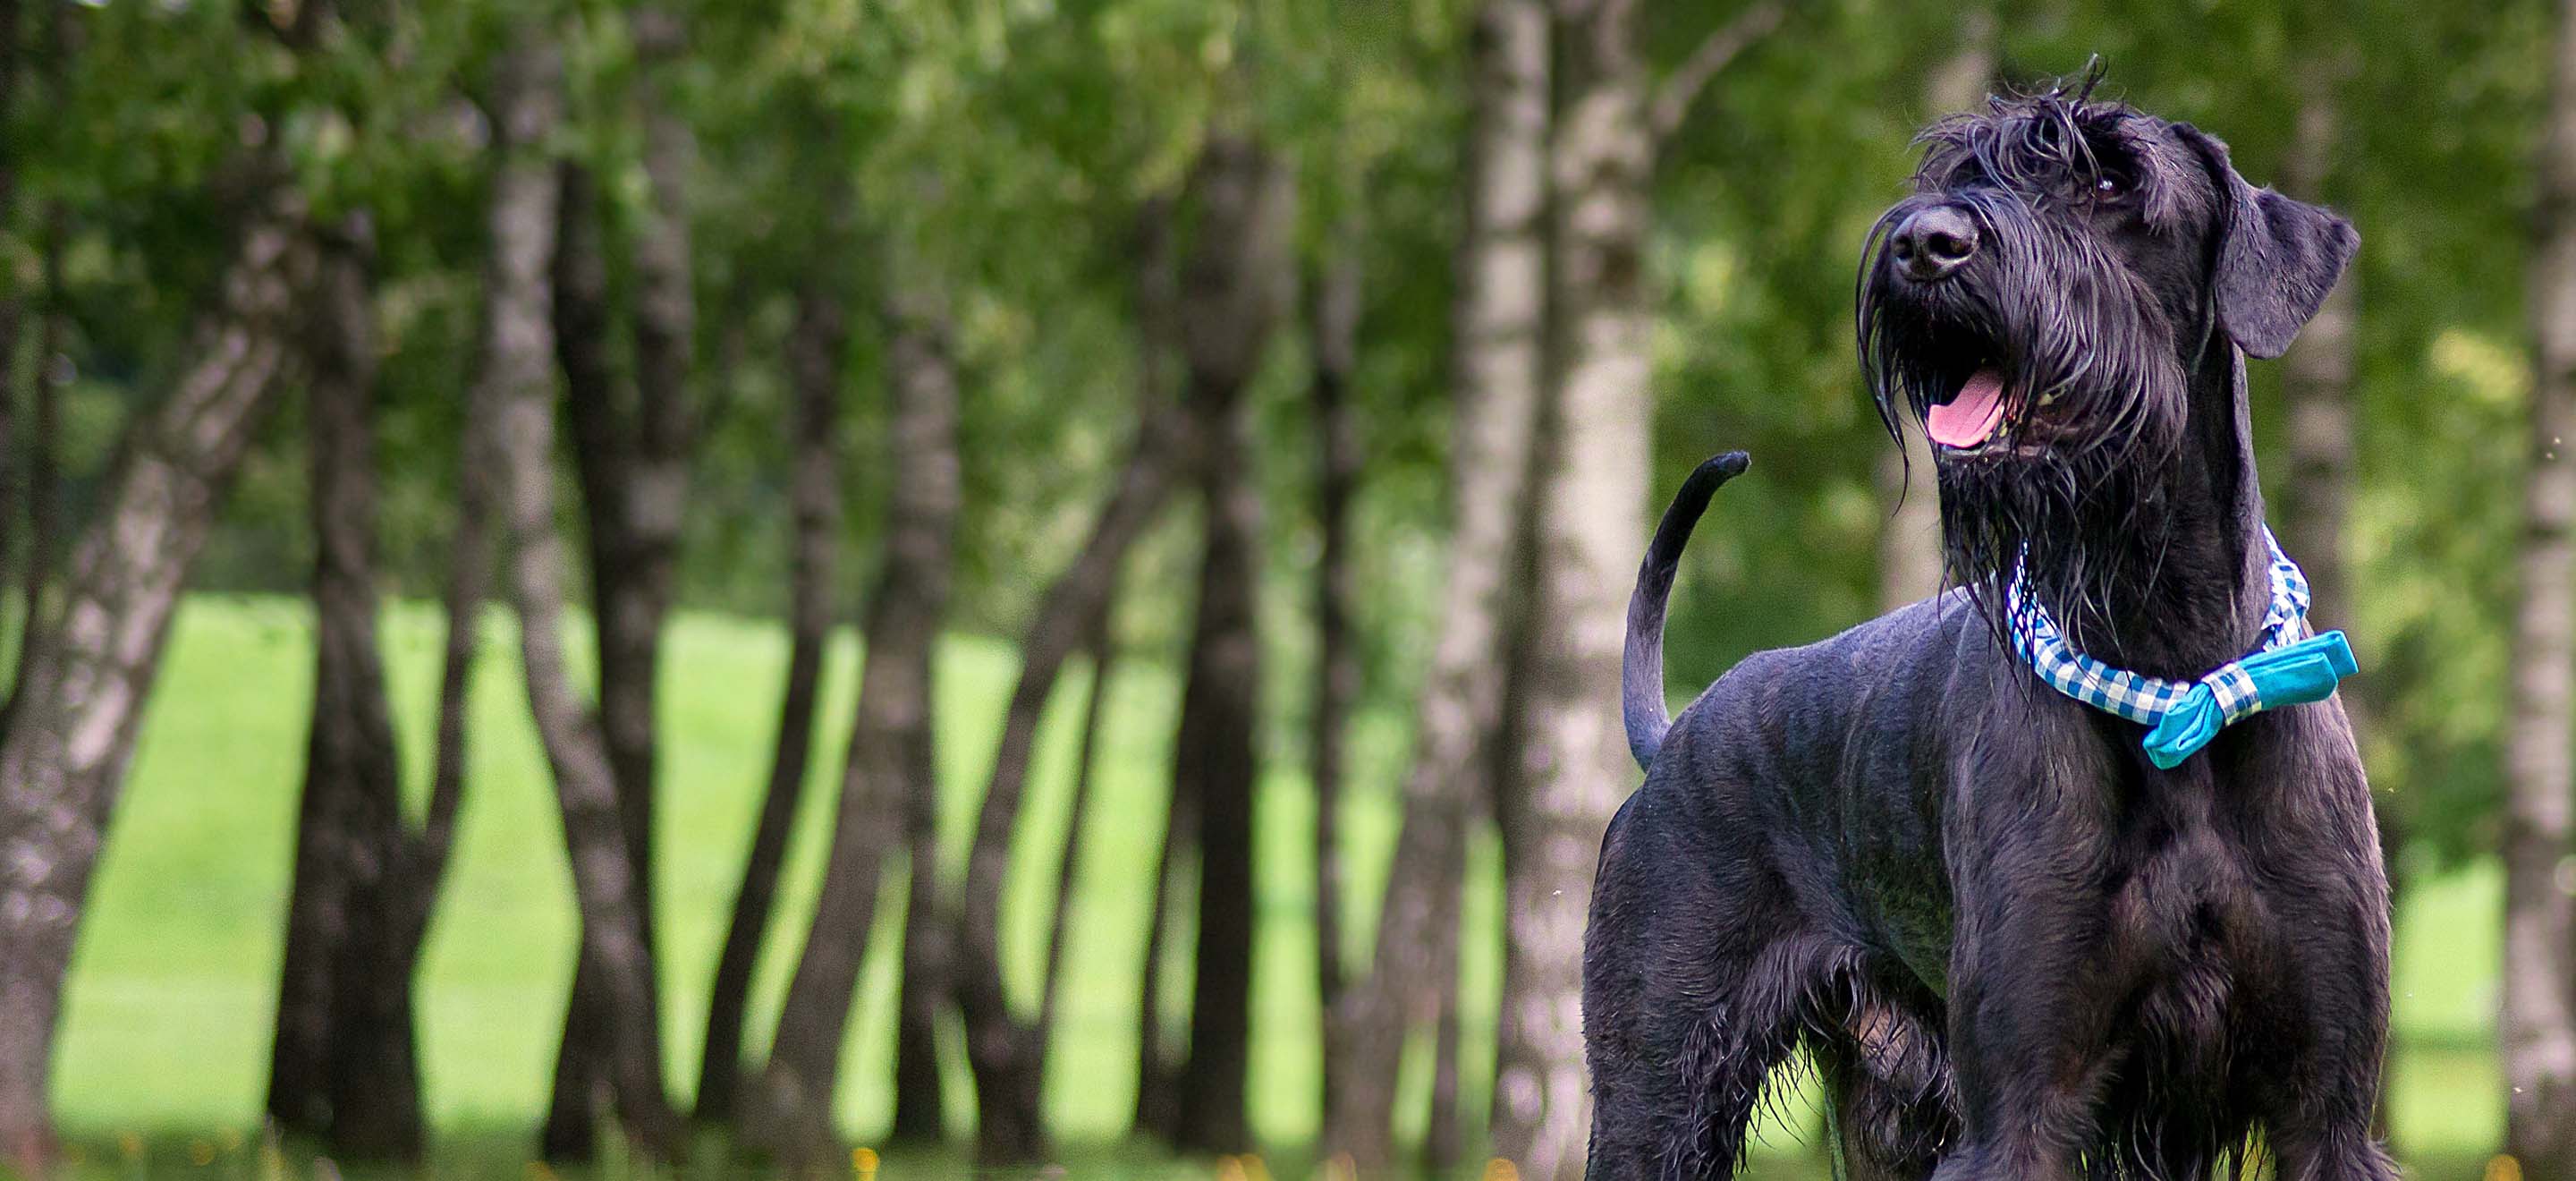 A Giant Schnauzer dog standing in a treelined park wearing a blue plaid bowtie collar image